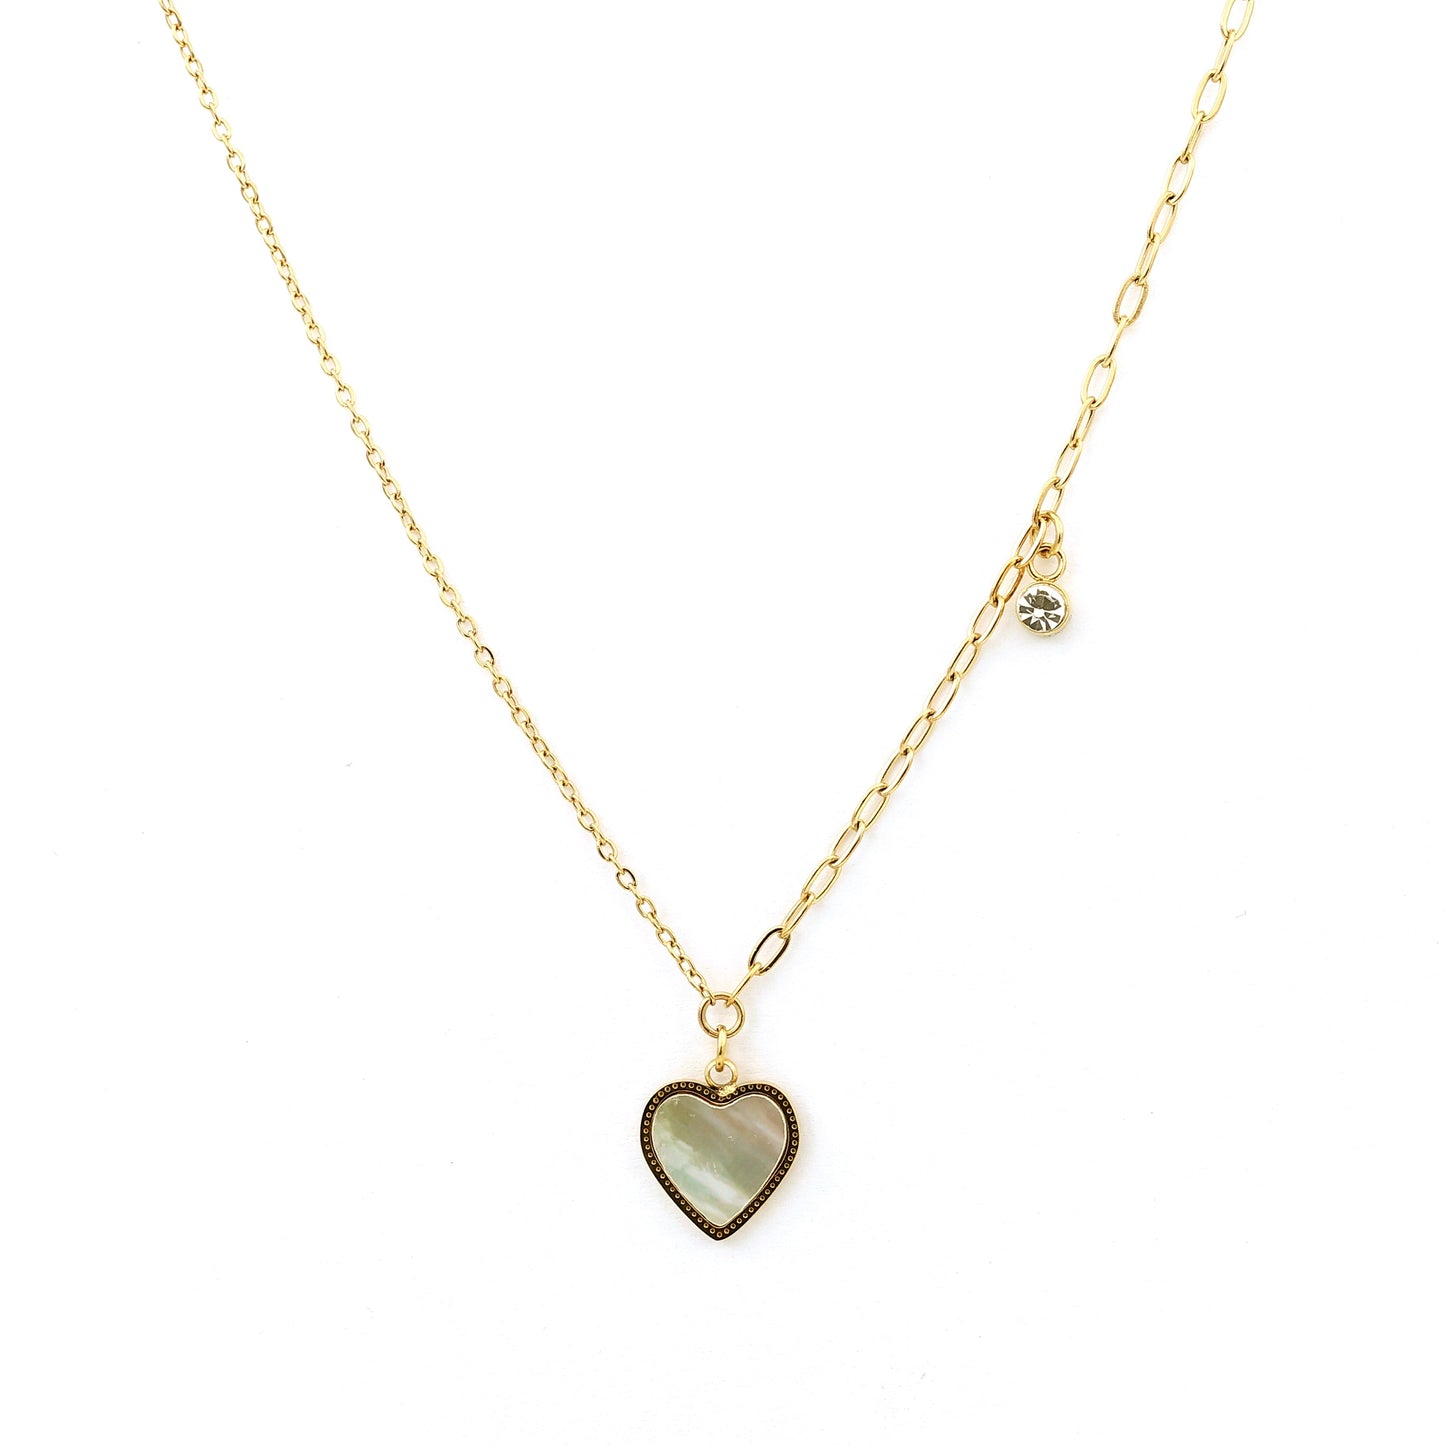 Marie Heart Necklace